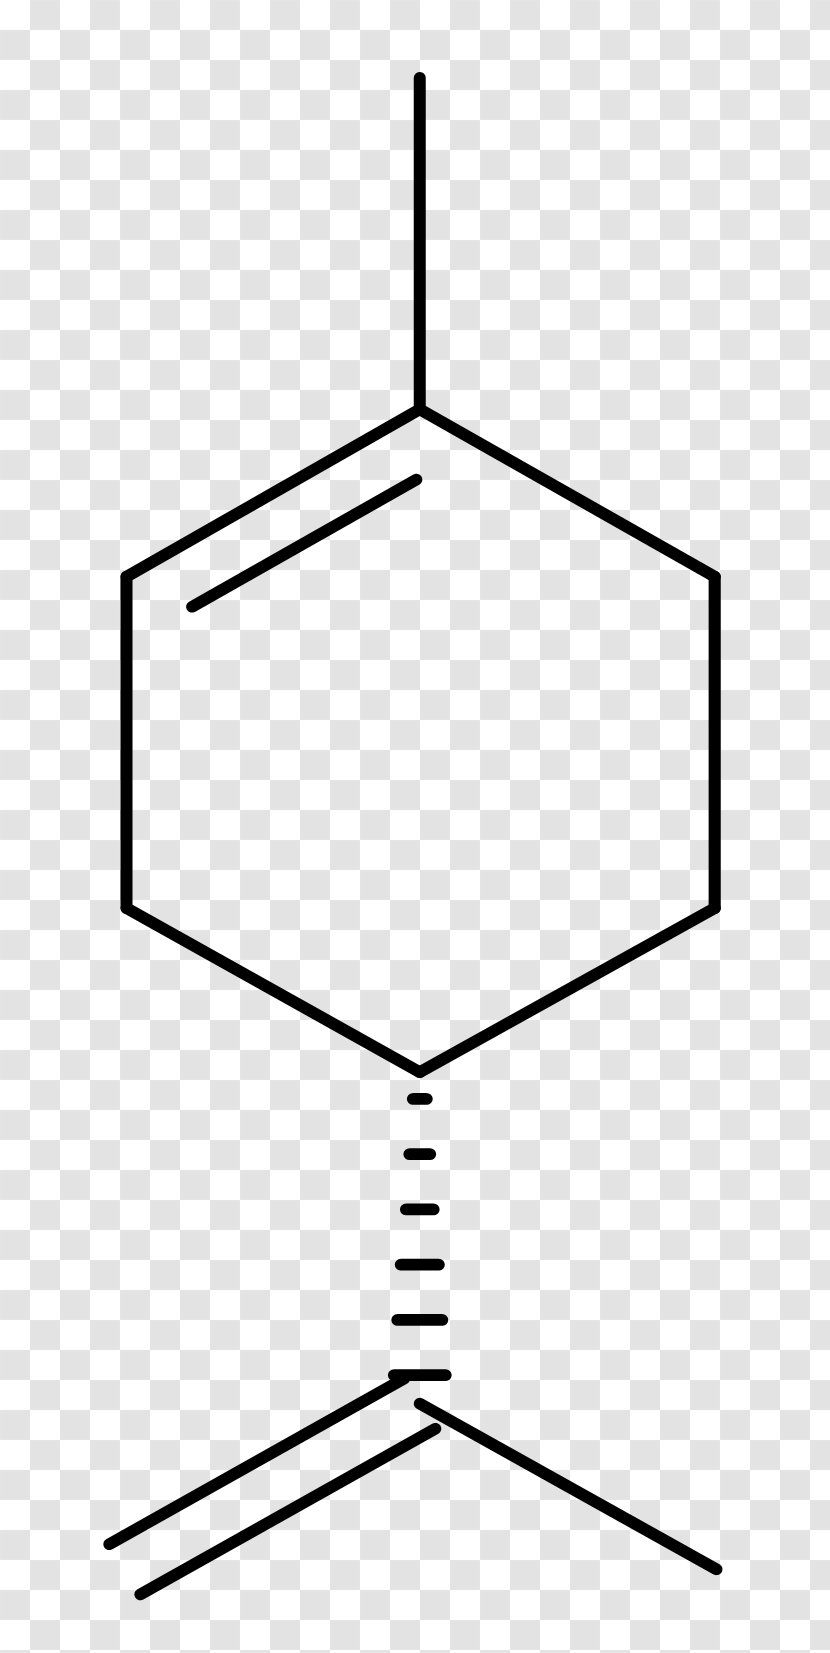 Limonene Carvone Aroma Compound Odor Chirality - Cartoon - Chemical Vector Transparent PNG